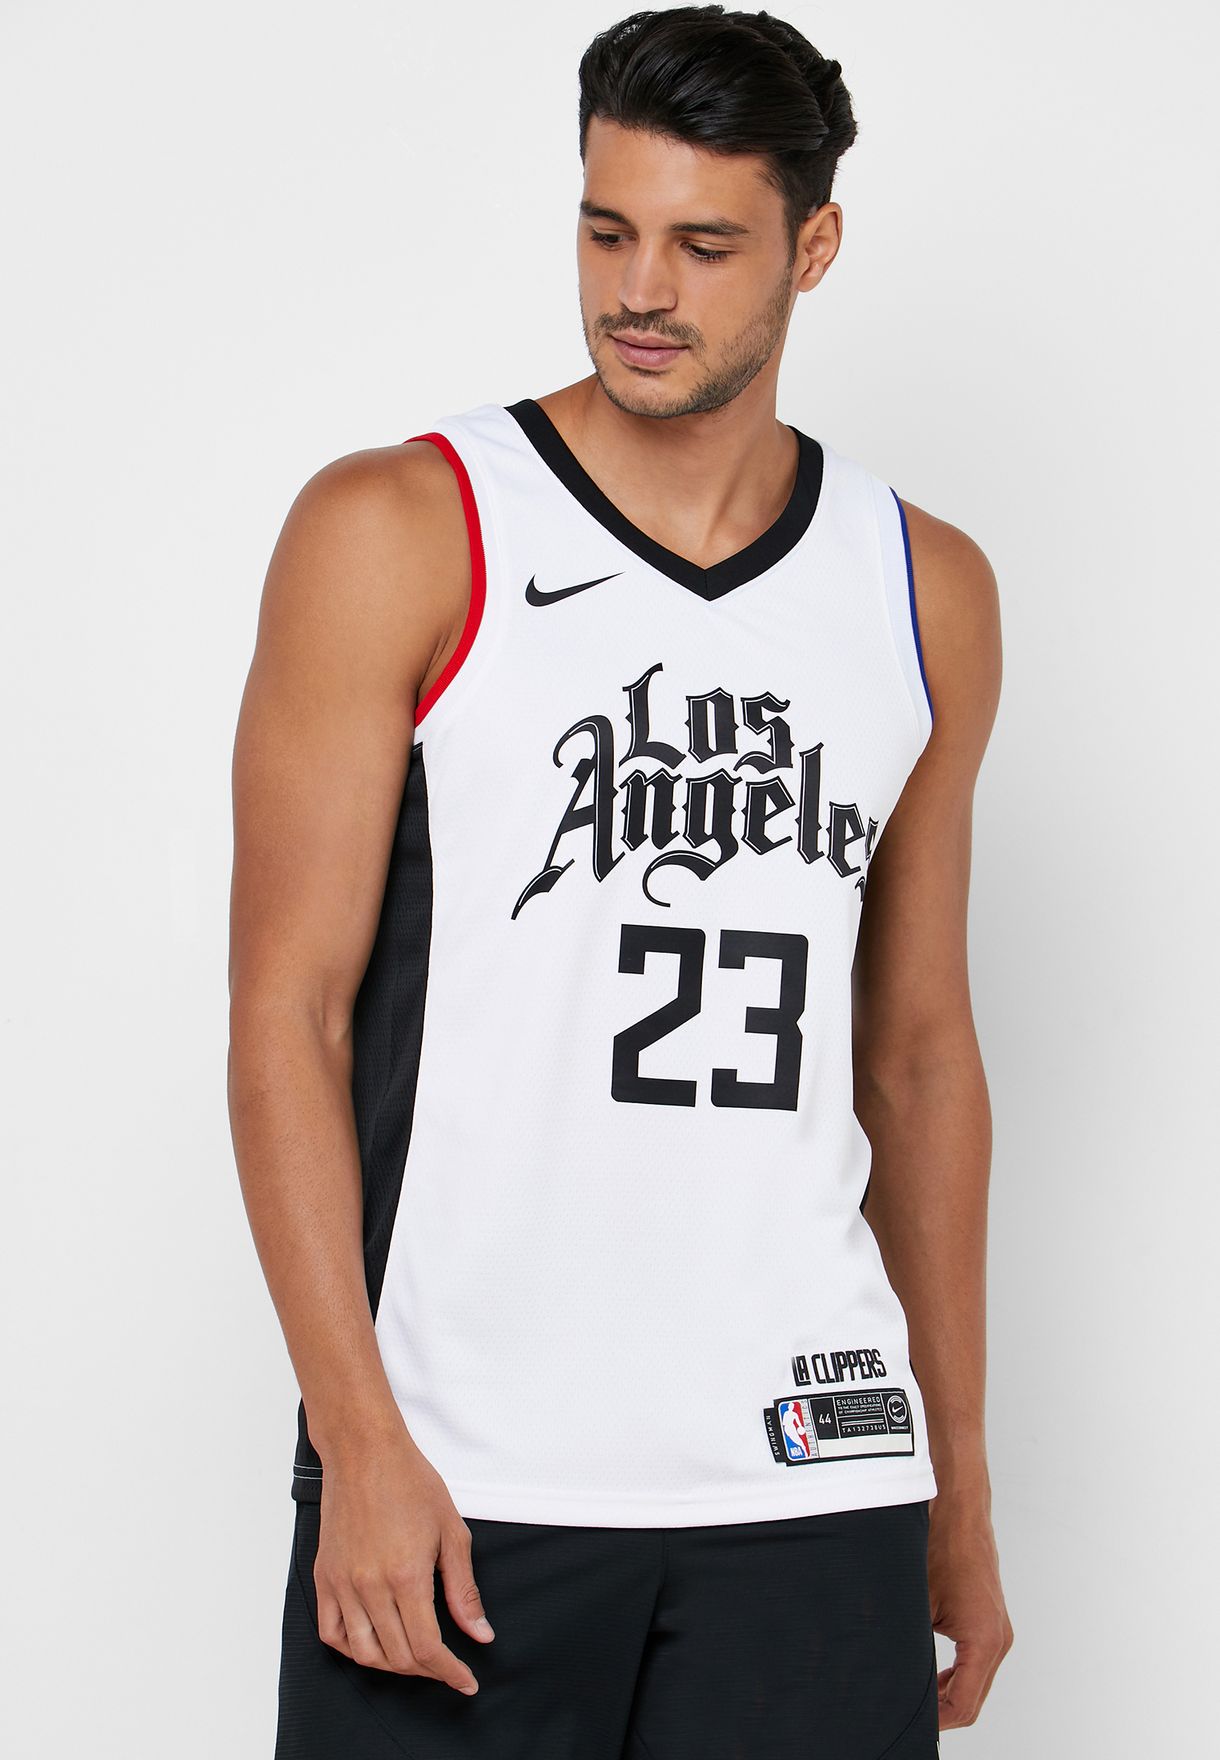 lou williams authentic jersey